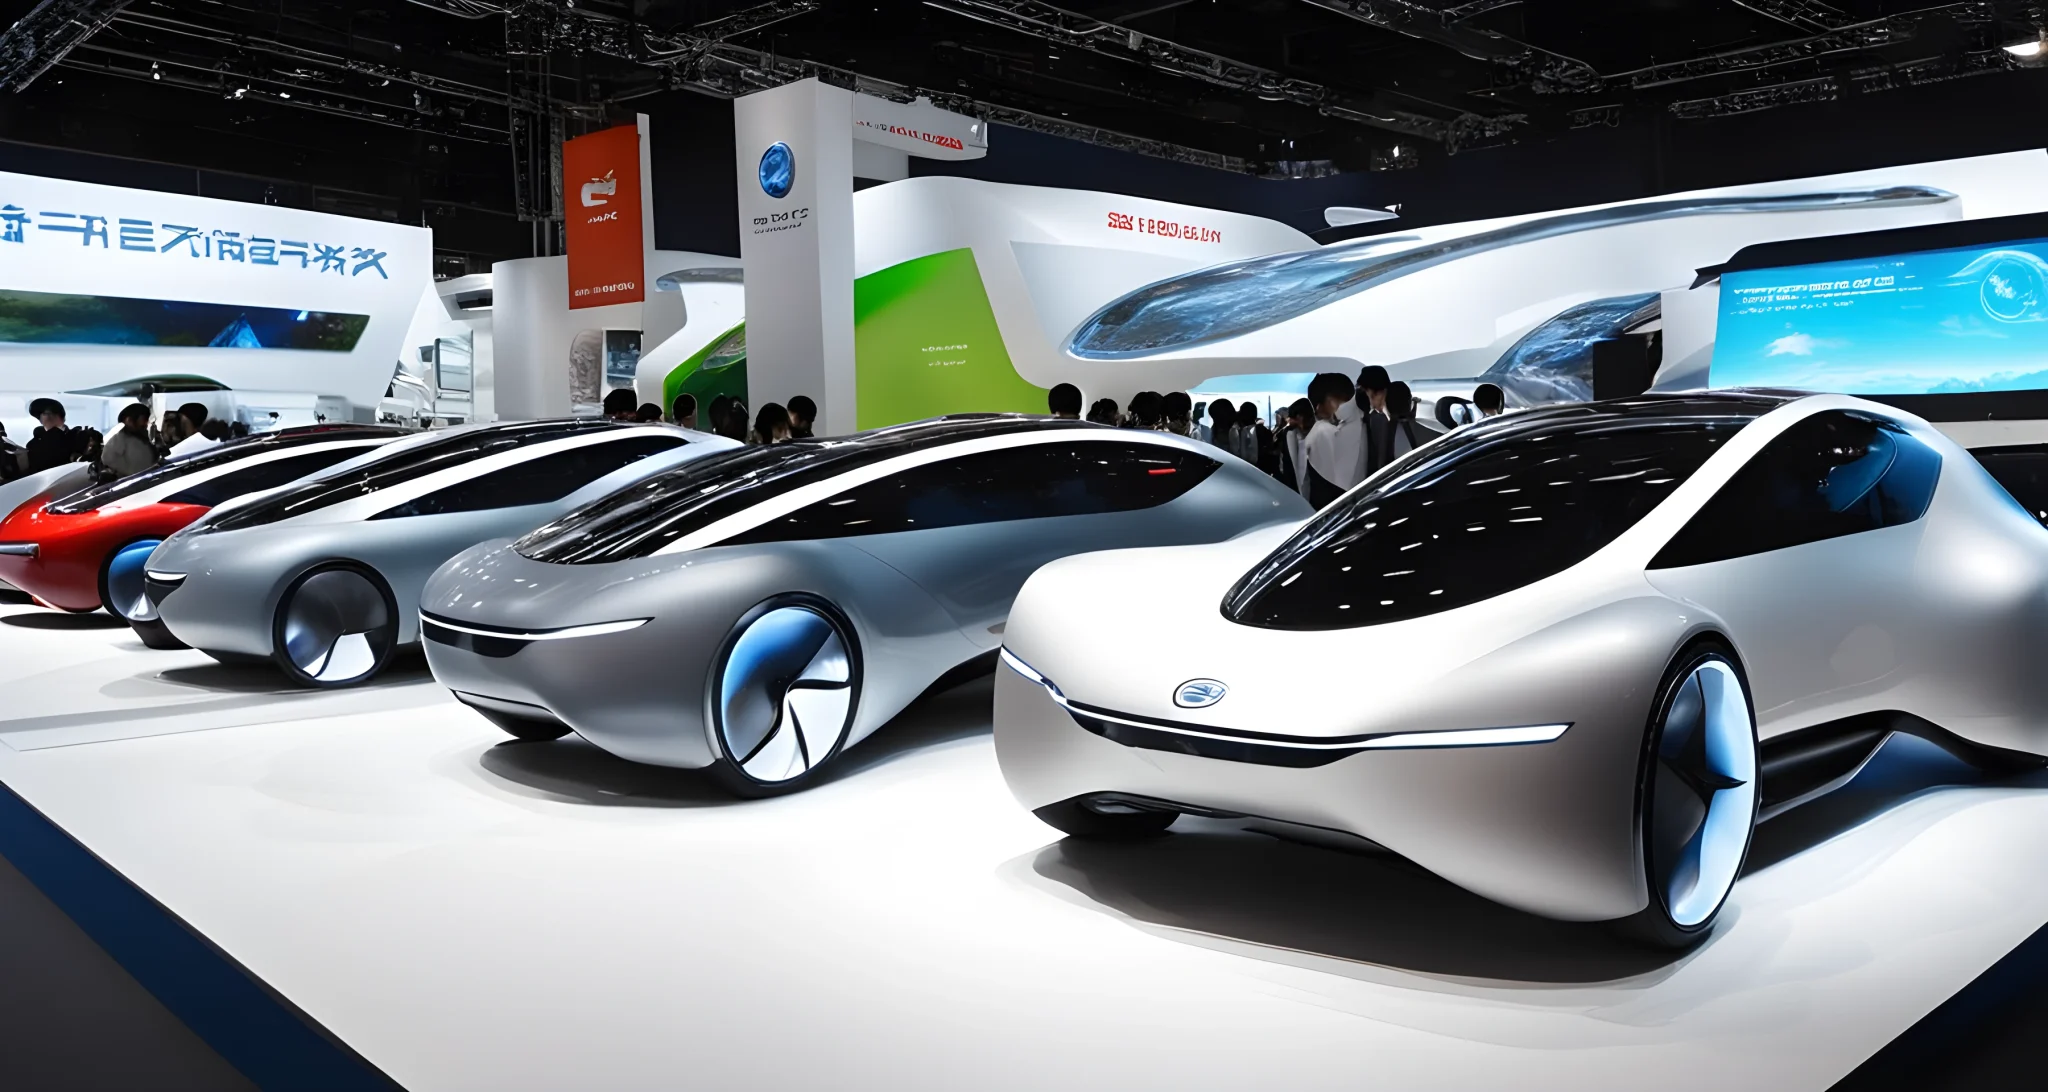 In the image, there are various futuristic concept cars, electric vehicle charging stations, and high-tech automobile prototypes on display at a Japanese auto show.